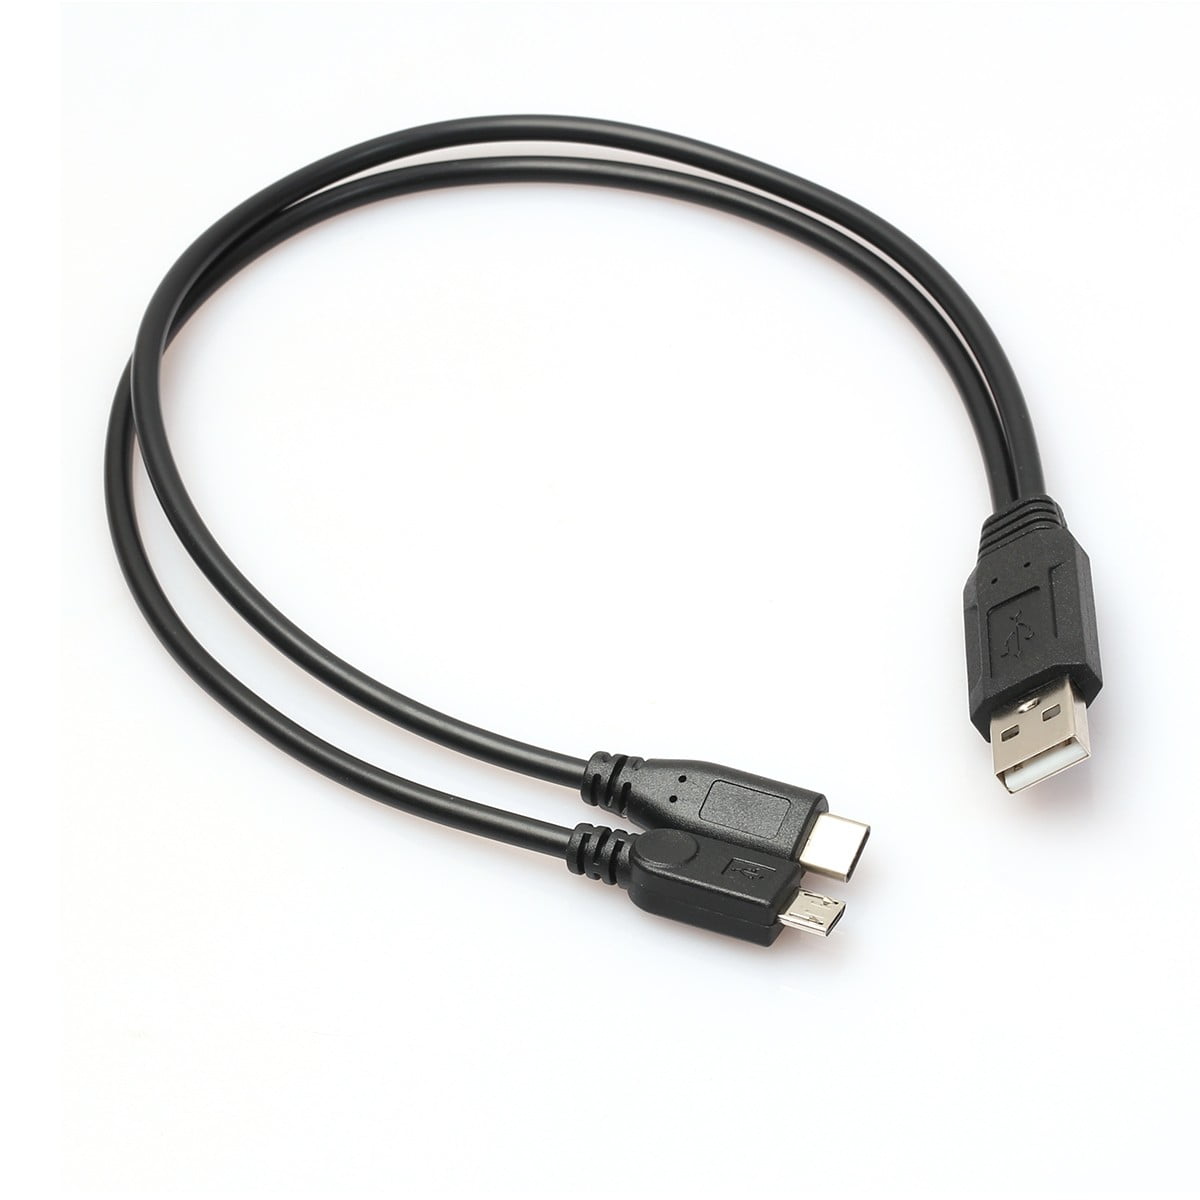 25ft 480 Mbps High Speed USB 2.0 Cable Type A Male/Female AMAF Extension Cord 